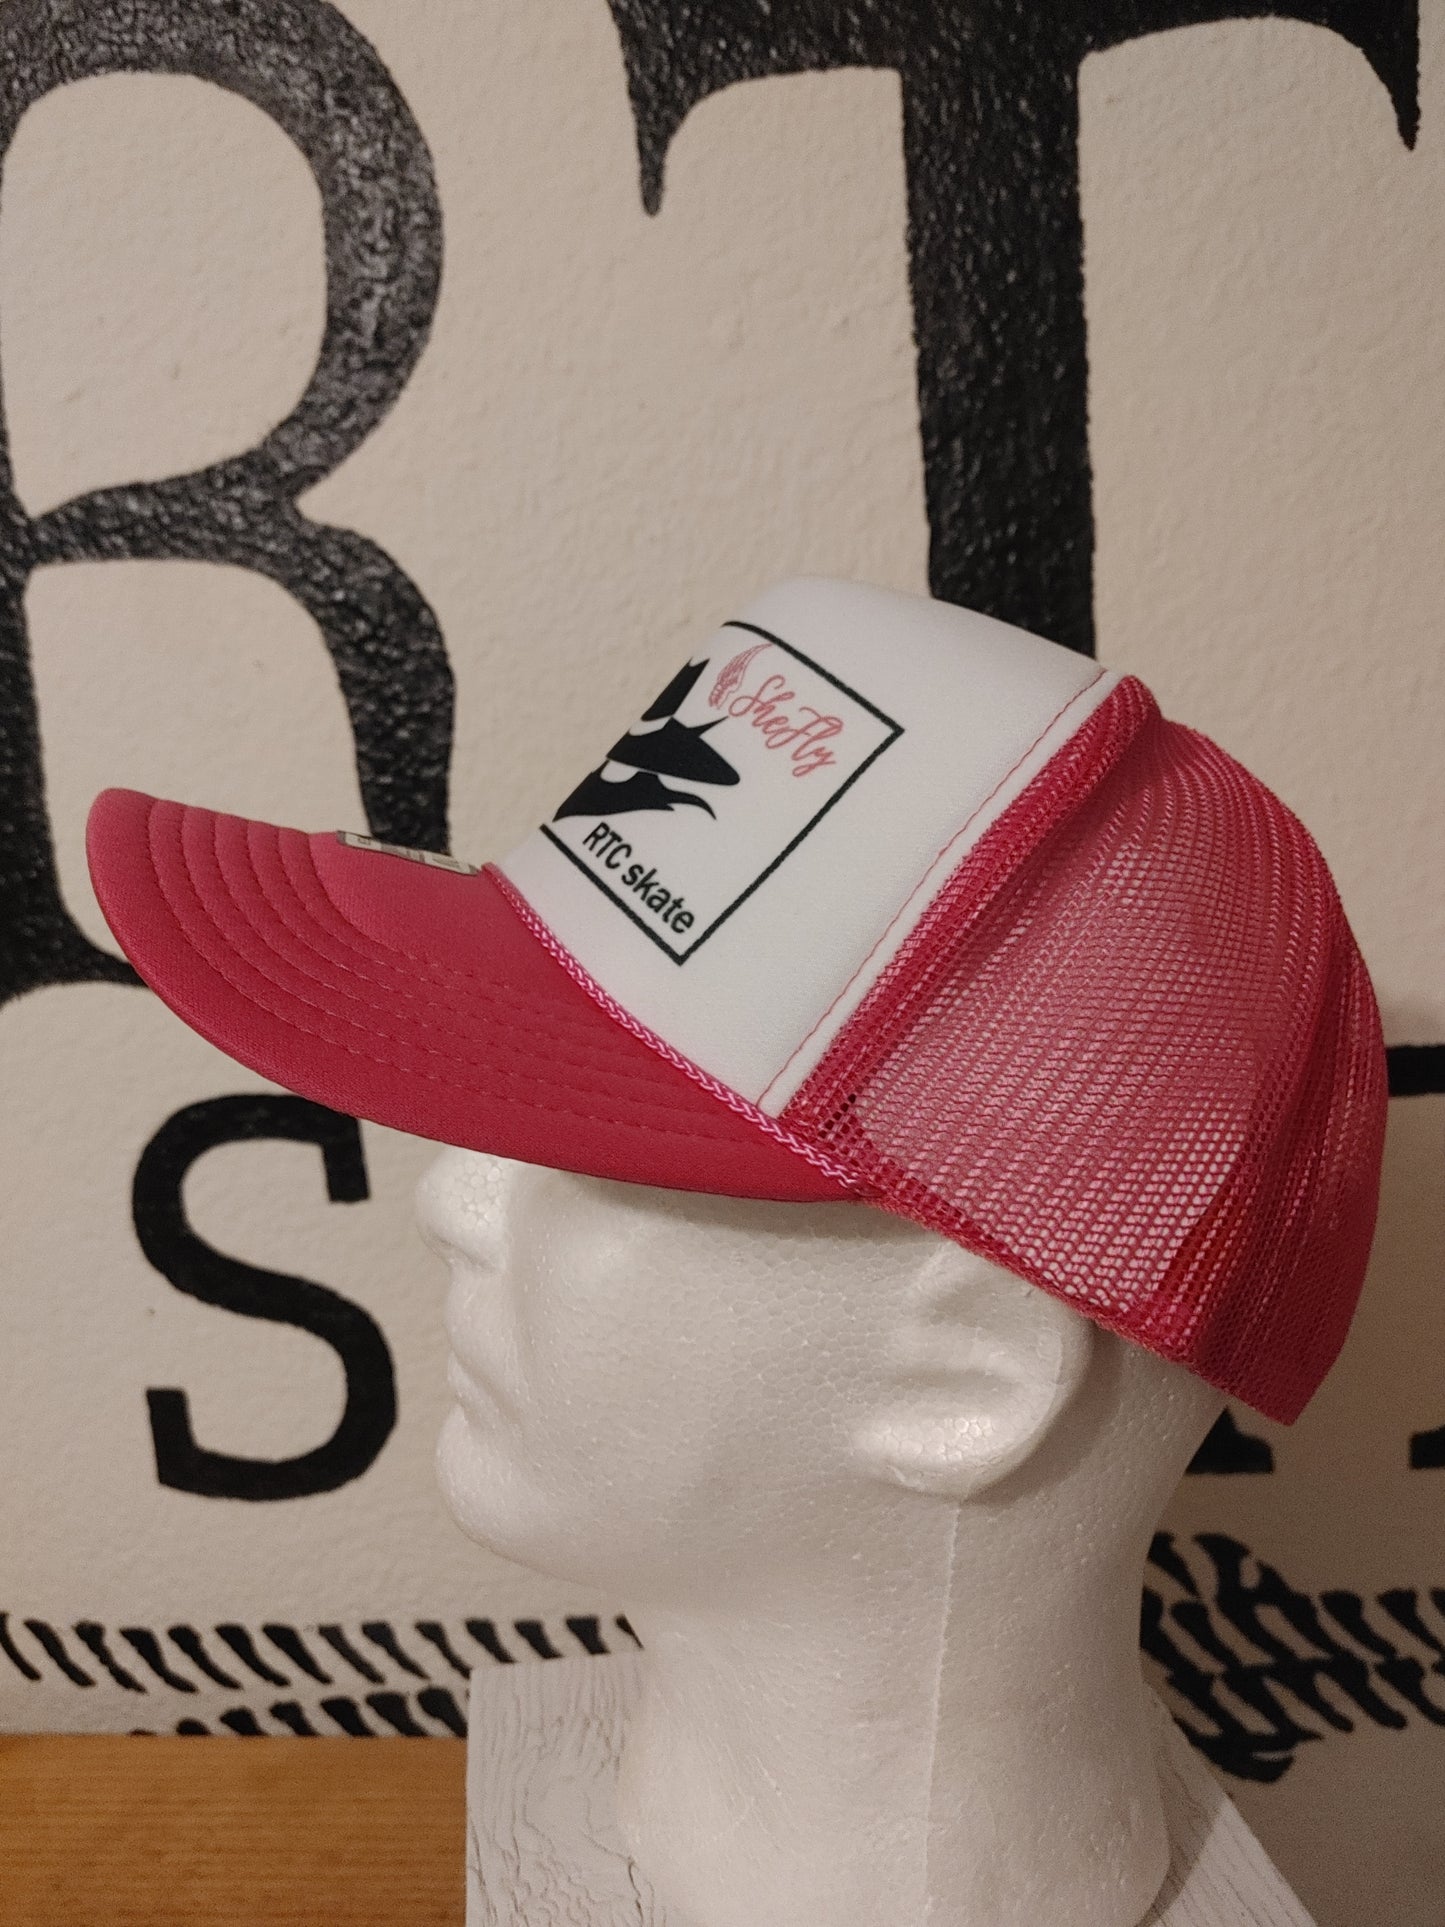 RTCskate / Shefly pink Trucker hat collabclothing